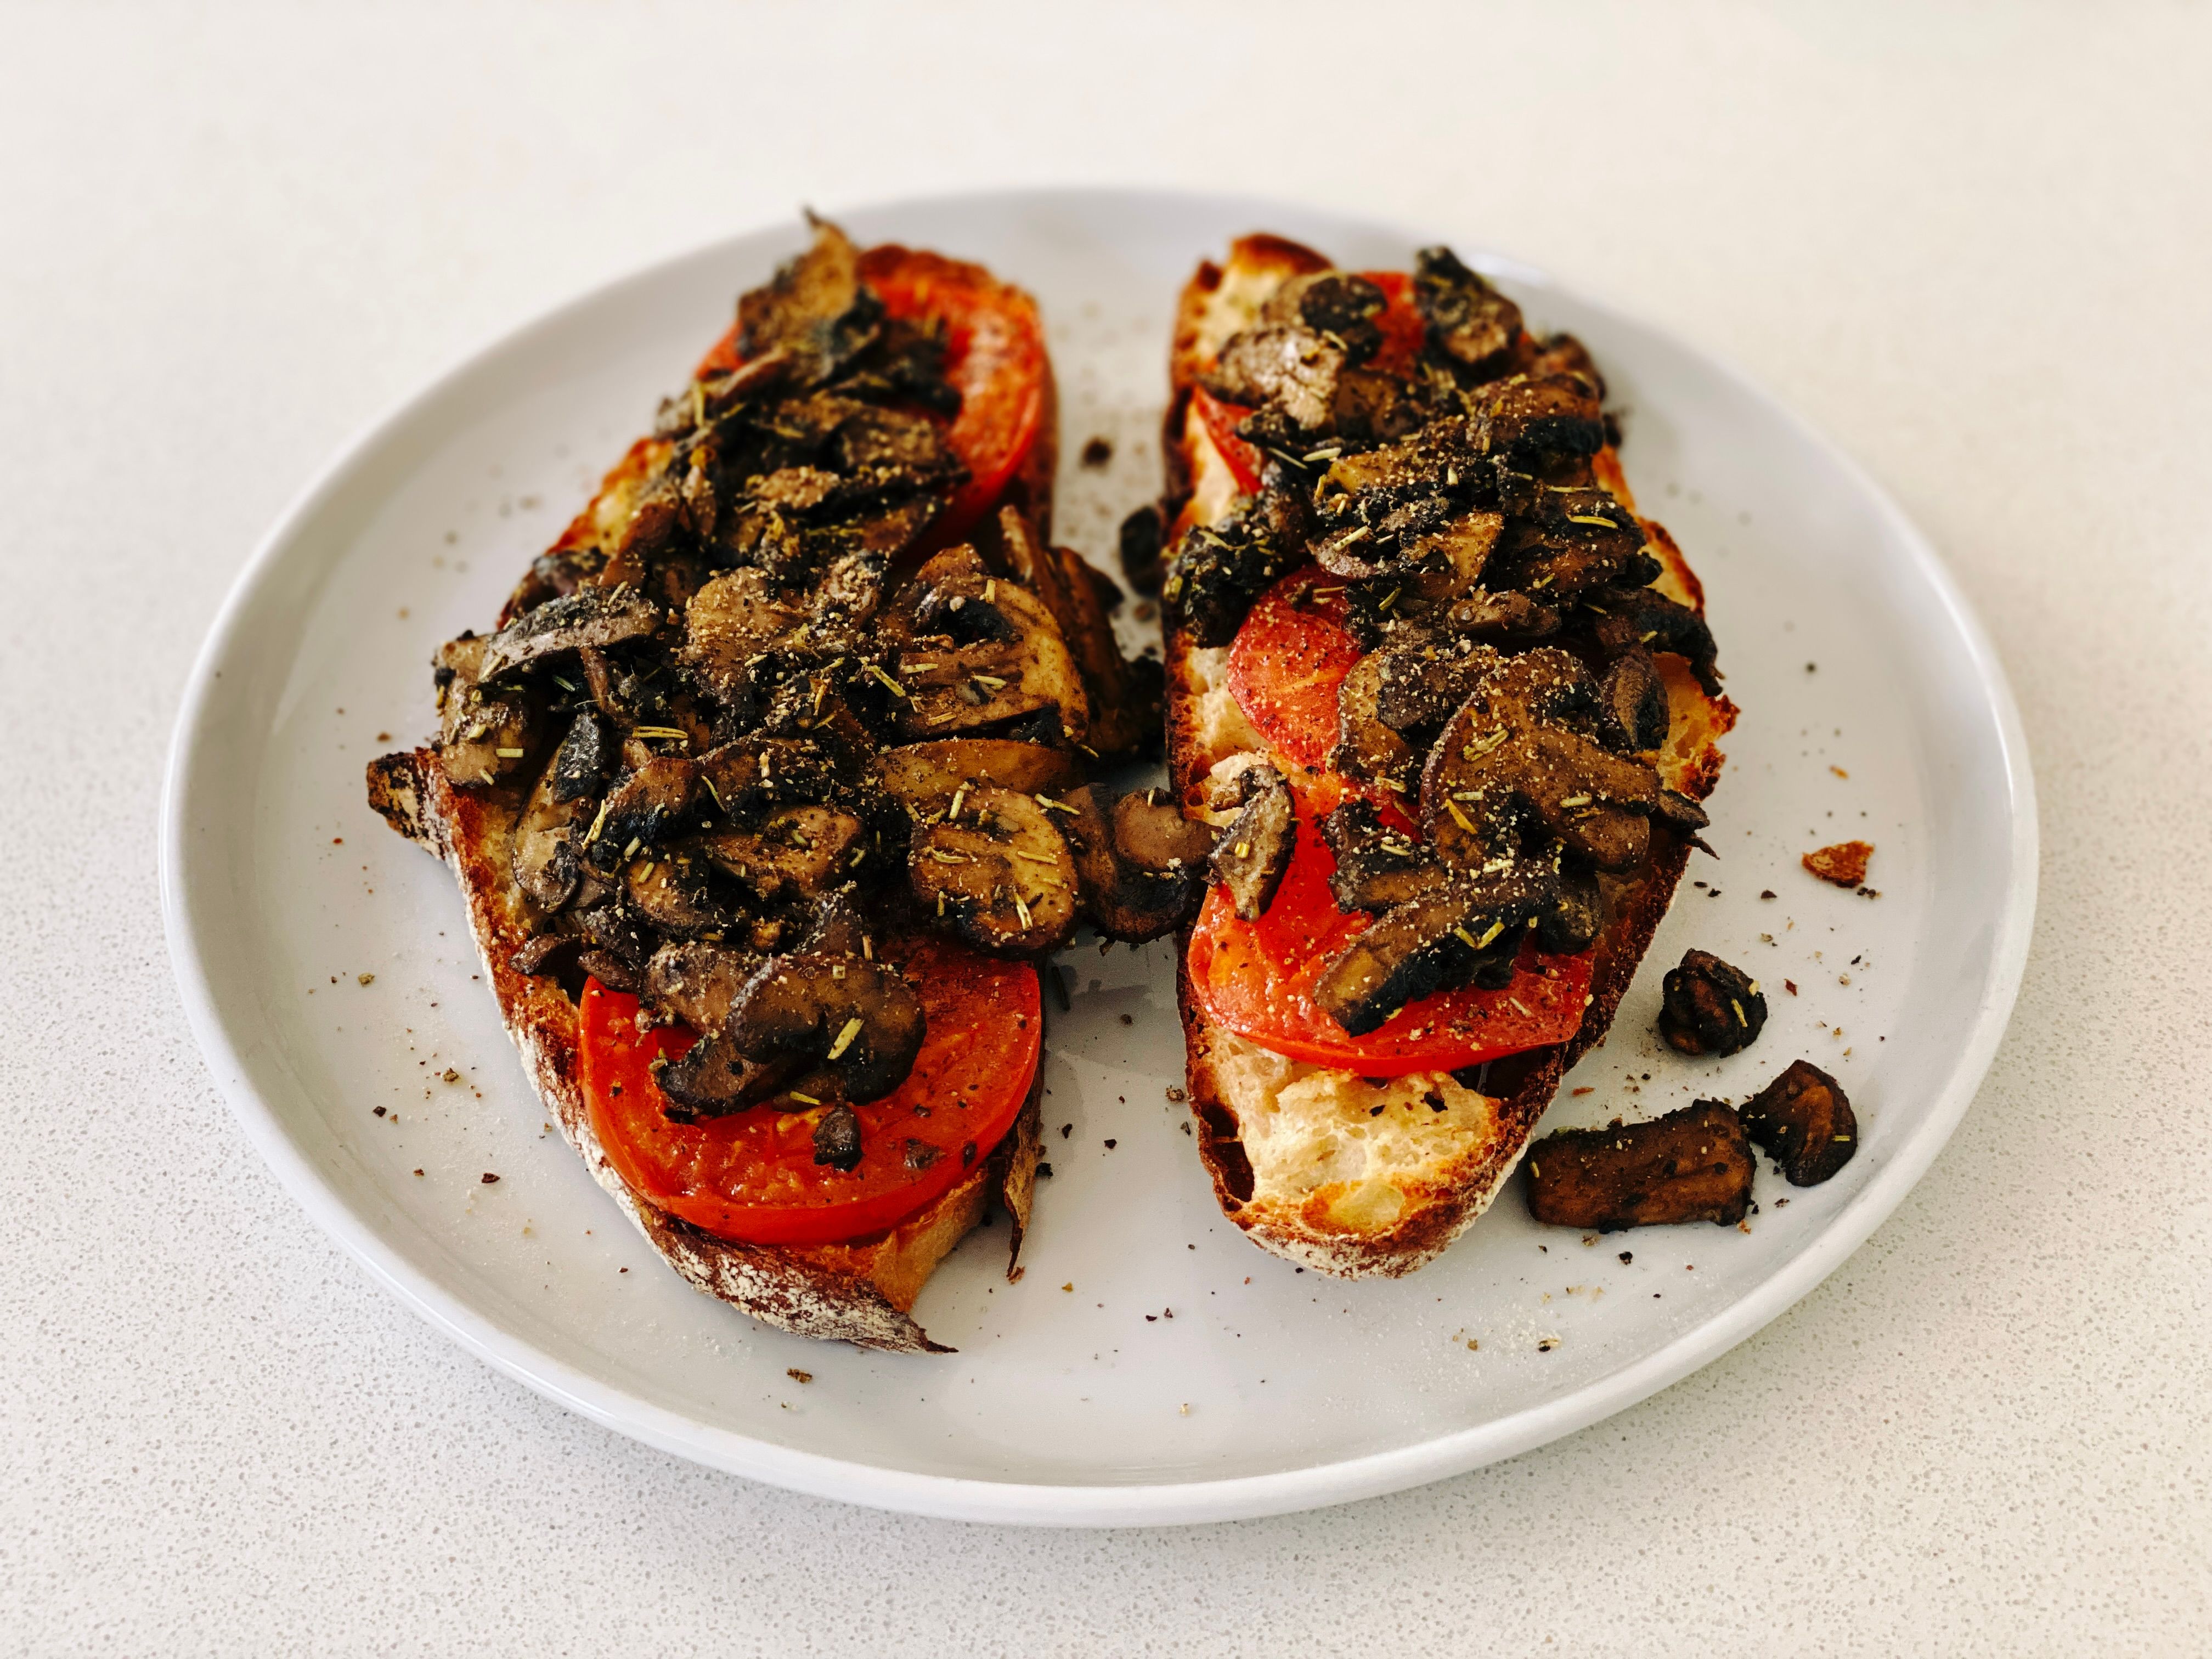 A photo of two slices of the aforementioned bread with slices of cooked tomato on top, and sliced mushrooms cooked in sage, rosemary, and garlic on top of that, all sitting on a white dinner plate.